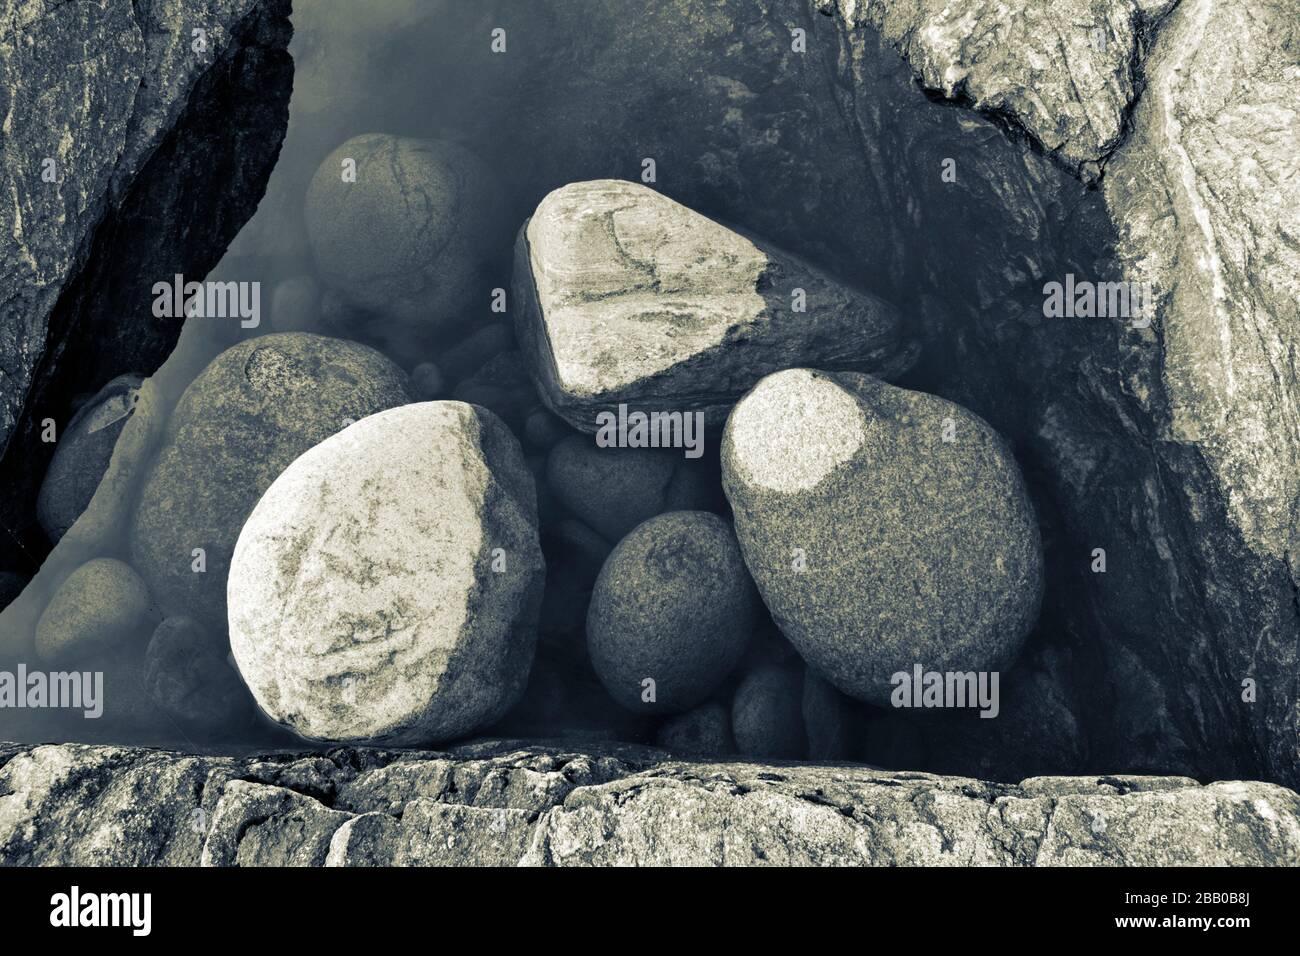 Stones are lying in a puddle on a rocky beach - duotone blue and yellow. Västernorrland, Sweden, Europe Stock Photo